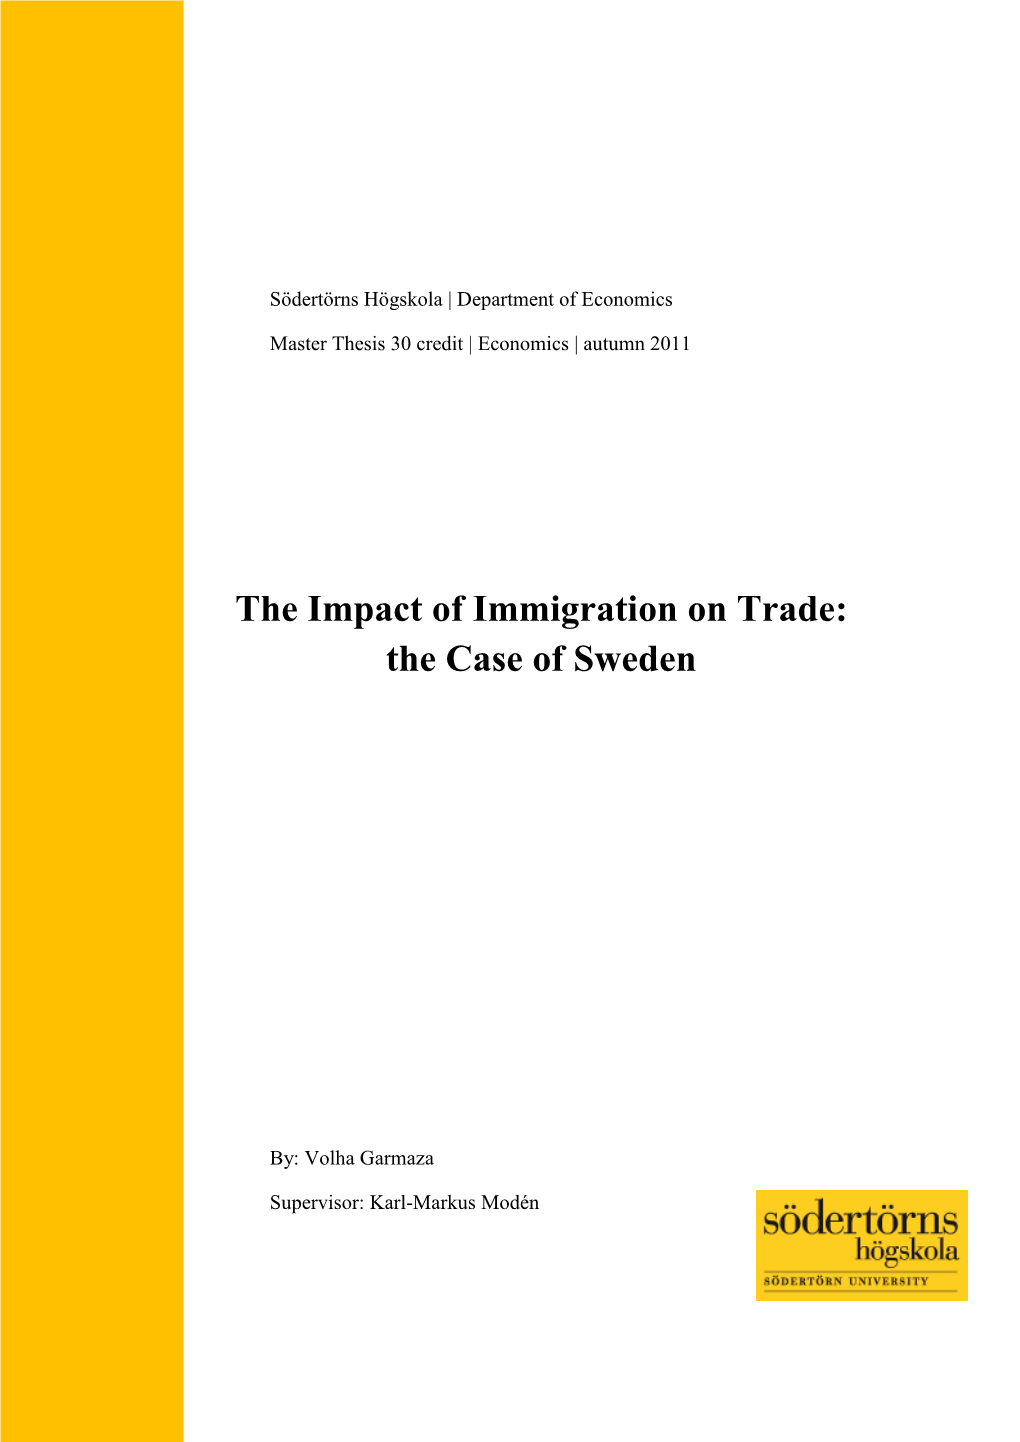 The Impact of Immigration on Trade: the Case for Sweden